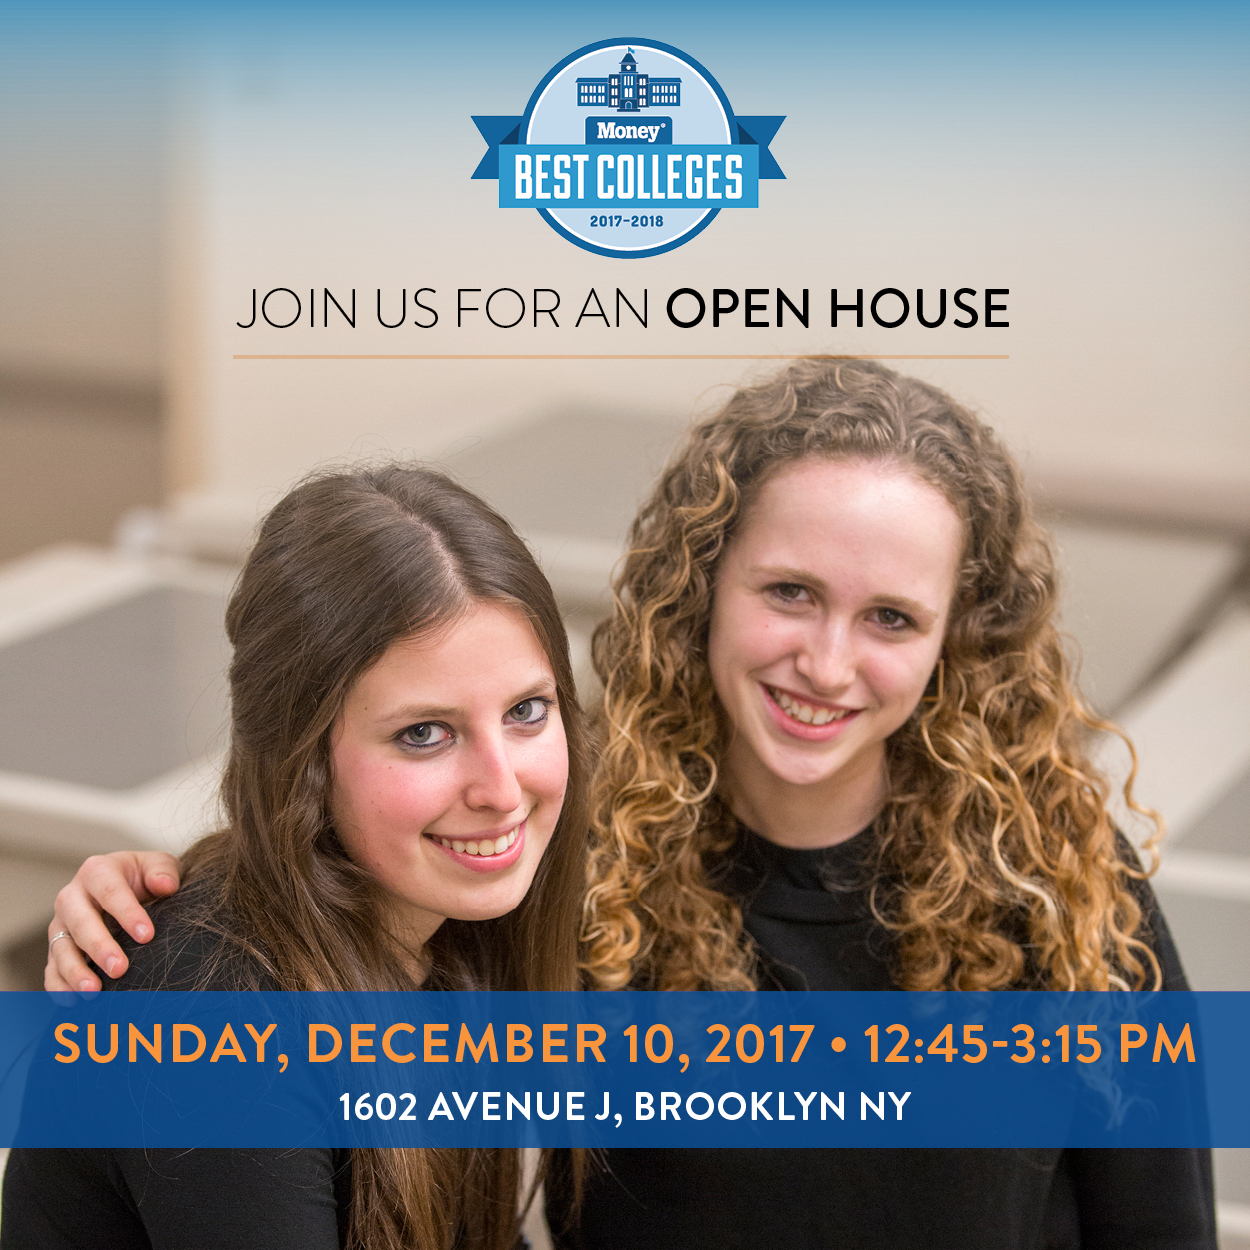 Join us at the Lander College of Art & Science's open house for the women's program, on December 10, 2017.